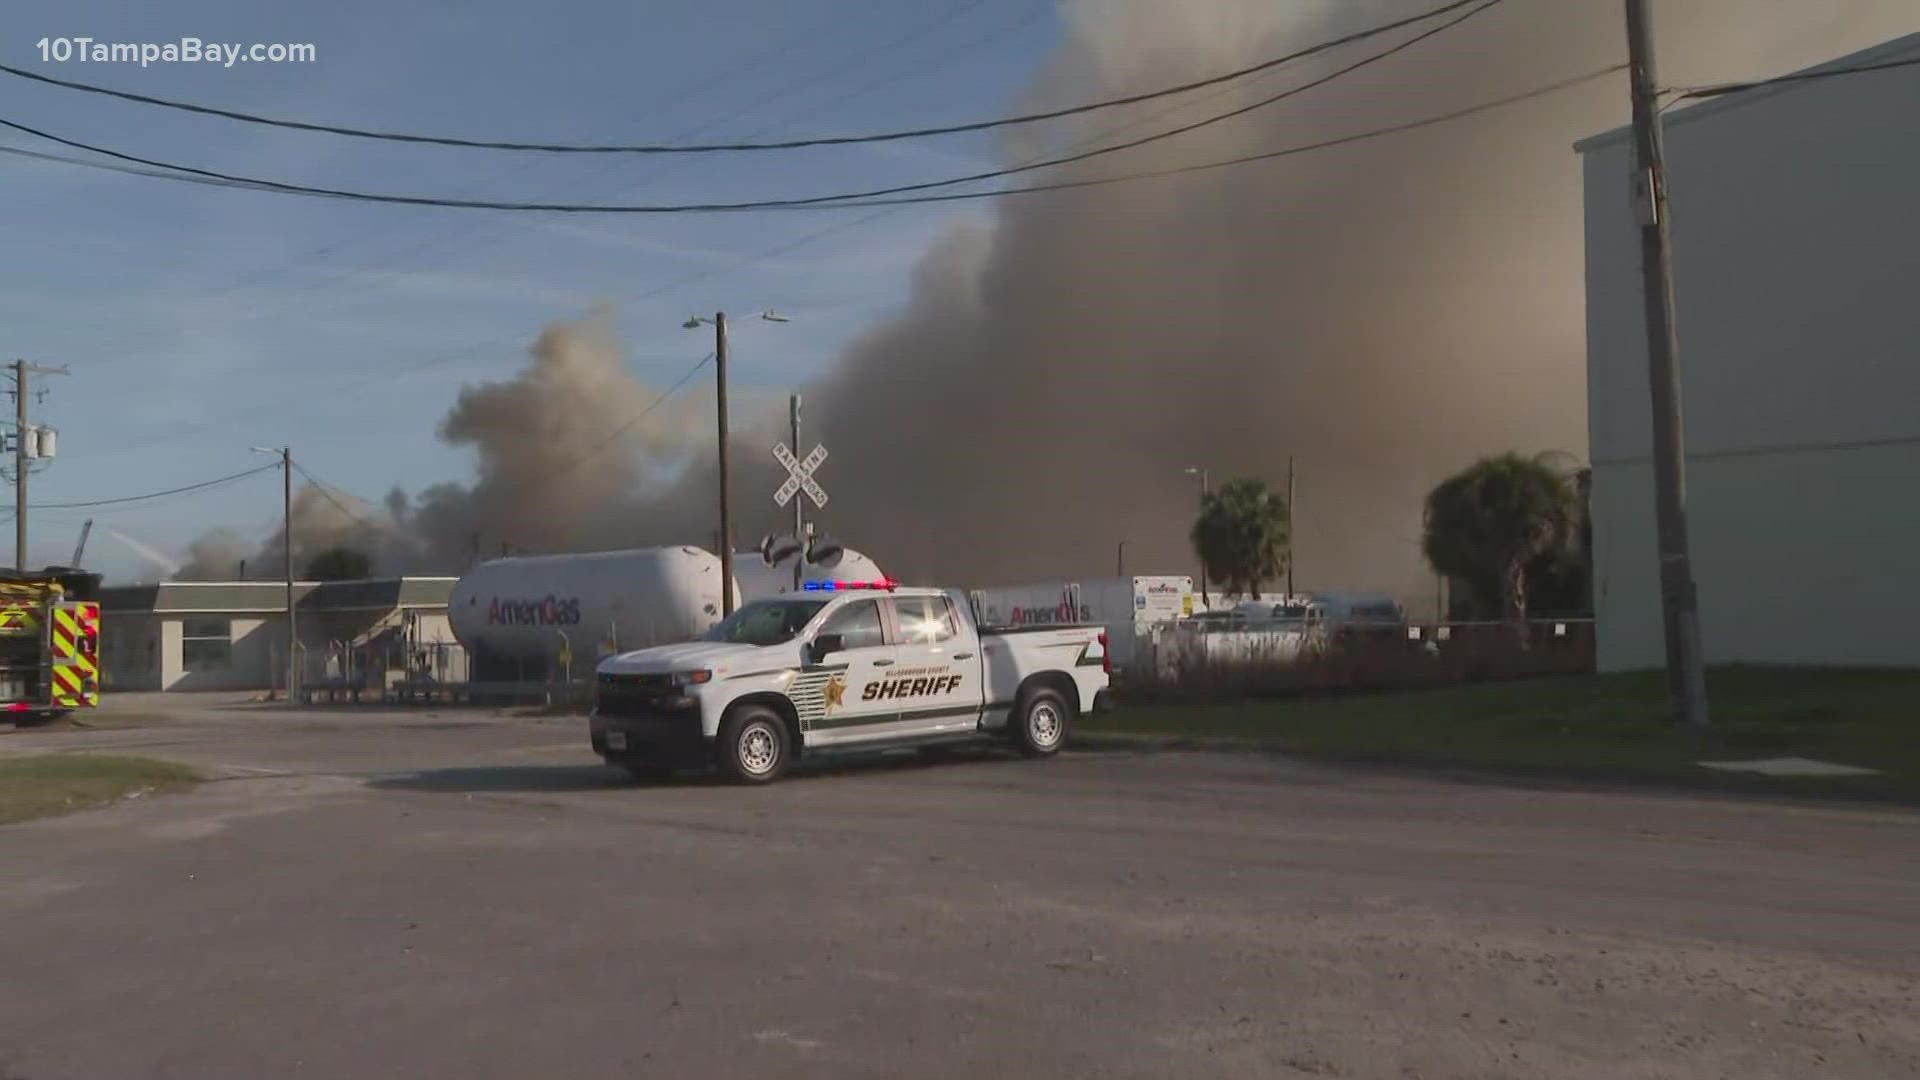 Hillsborough Fire Rescue put out a massive fire at a scrap metal yard in Tampa Saturday afternoon. Clouds of smoke could be seen for miles from the blaze.